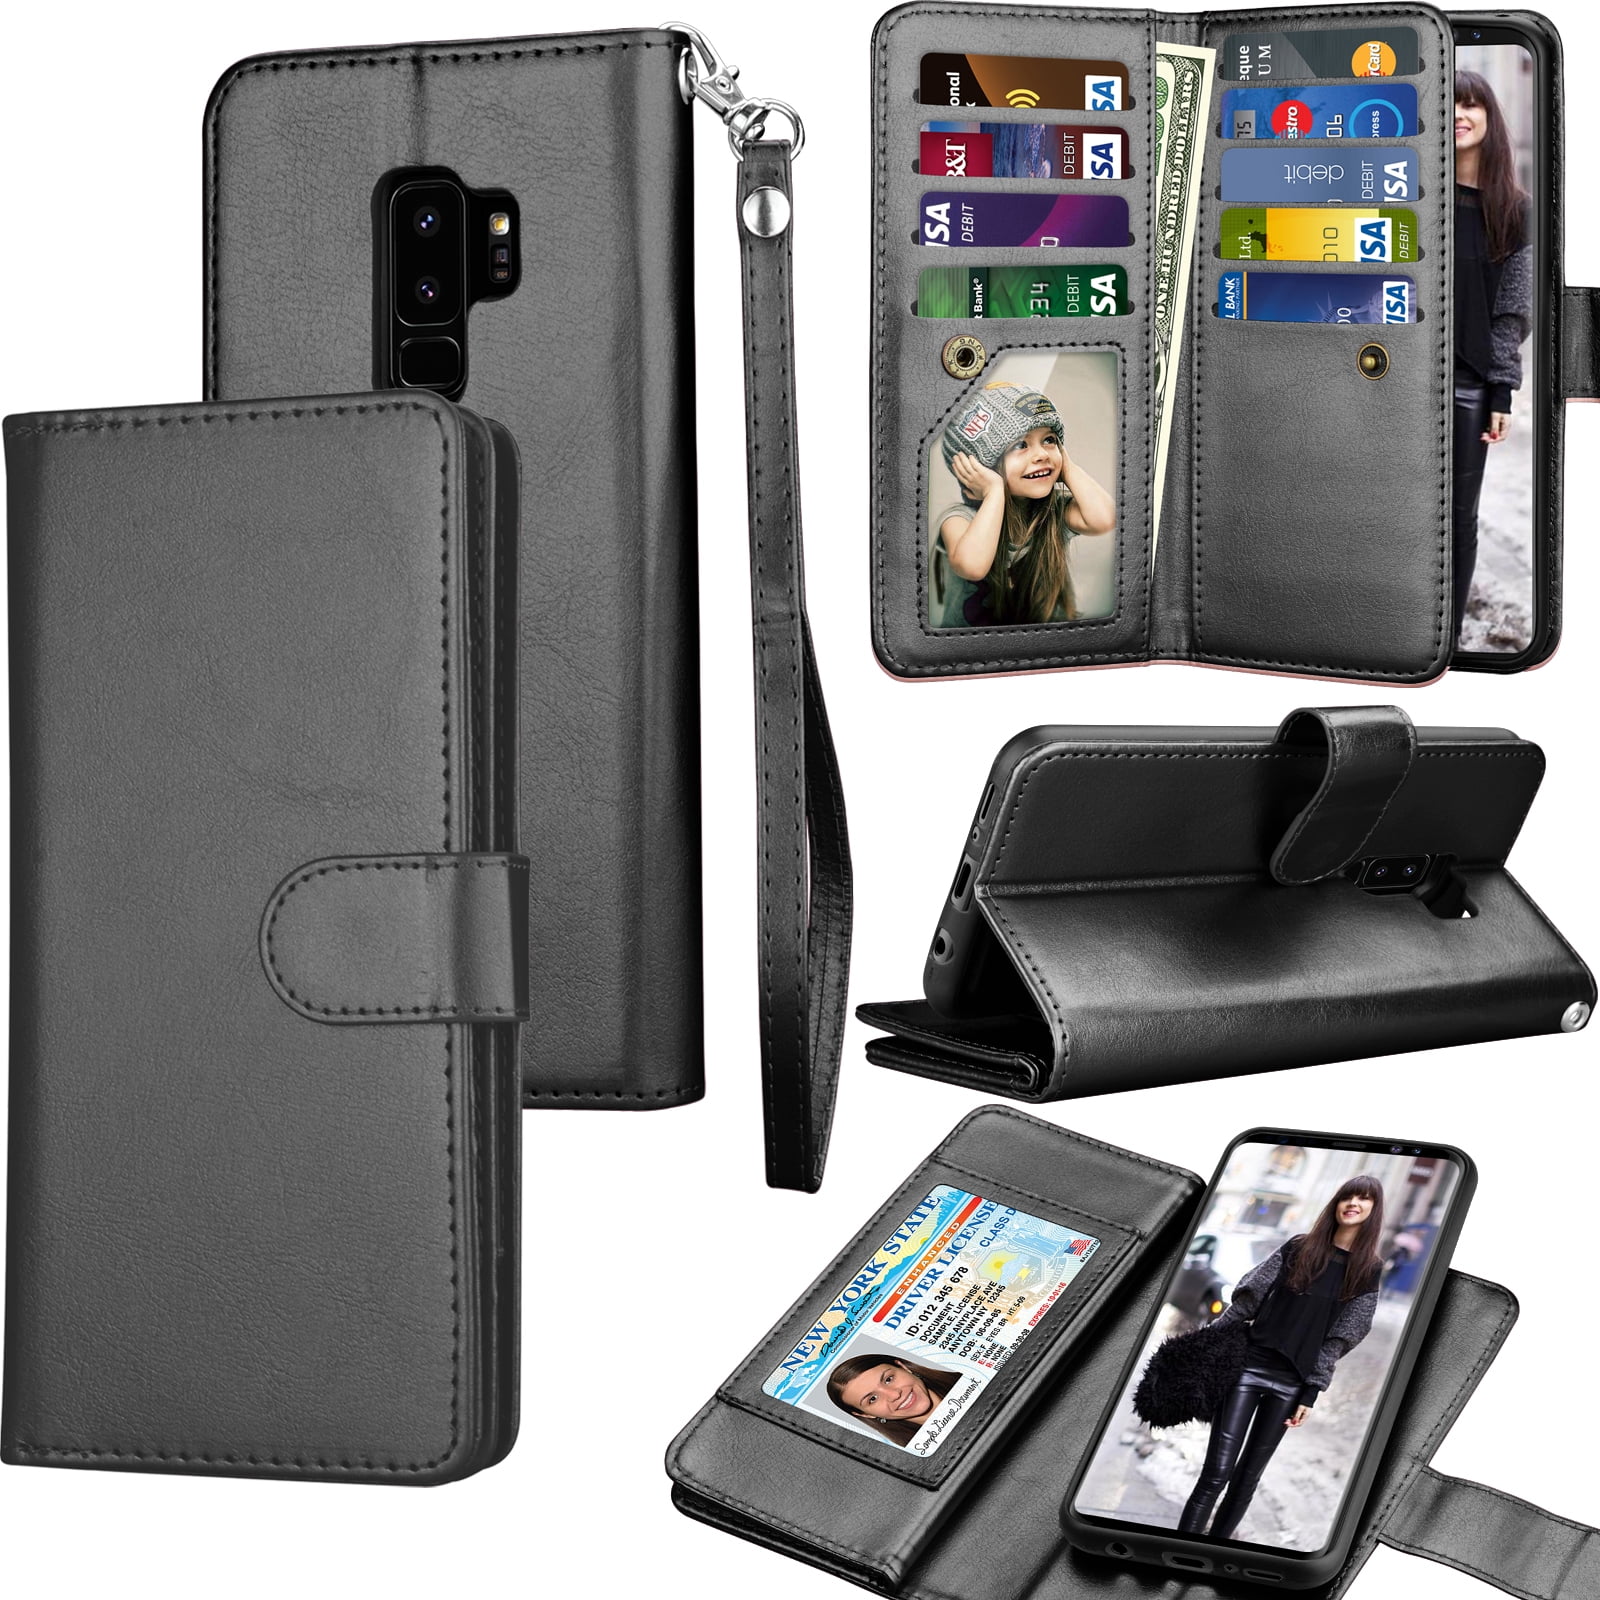 Samsung Galaxy S9 Plus Flip Case Cover for Leather Luxury Business Kickstand Card Holders Mobile Phone case Flip Cover 